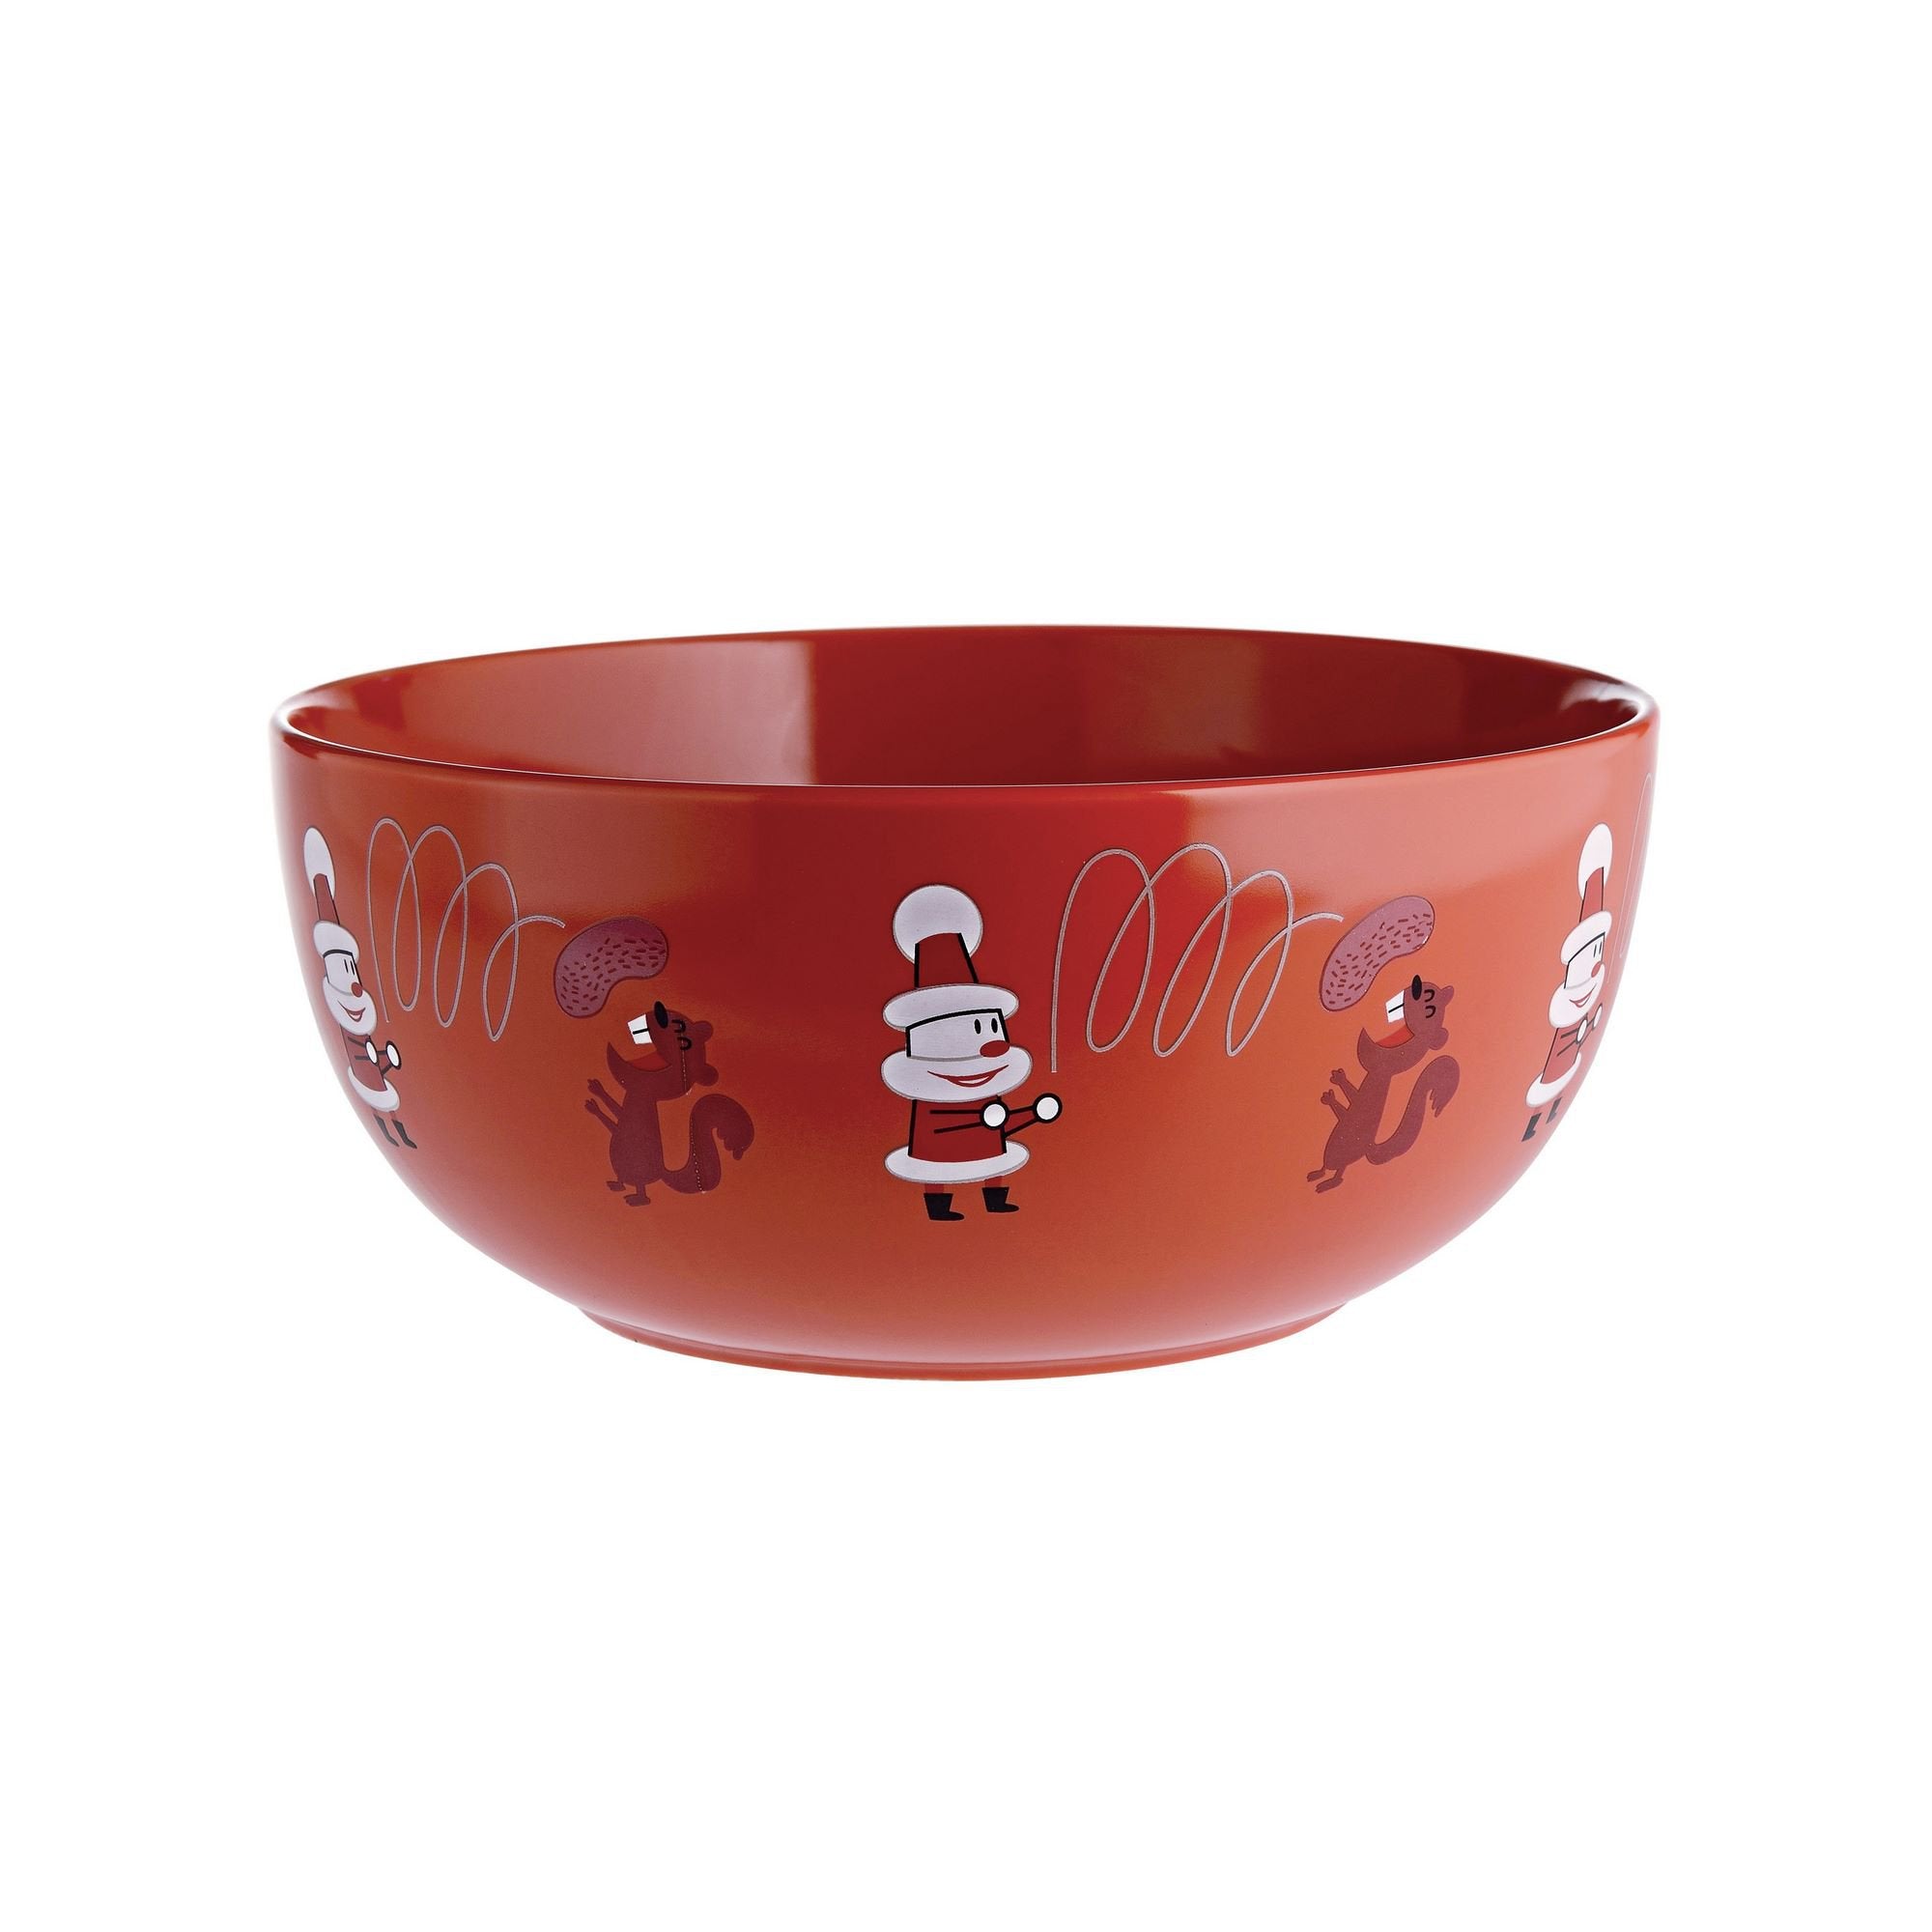 Nut bowl - Get nuts! Christmas